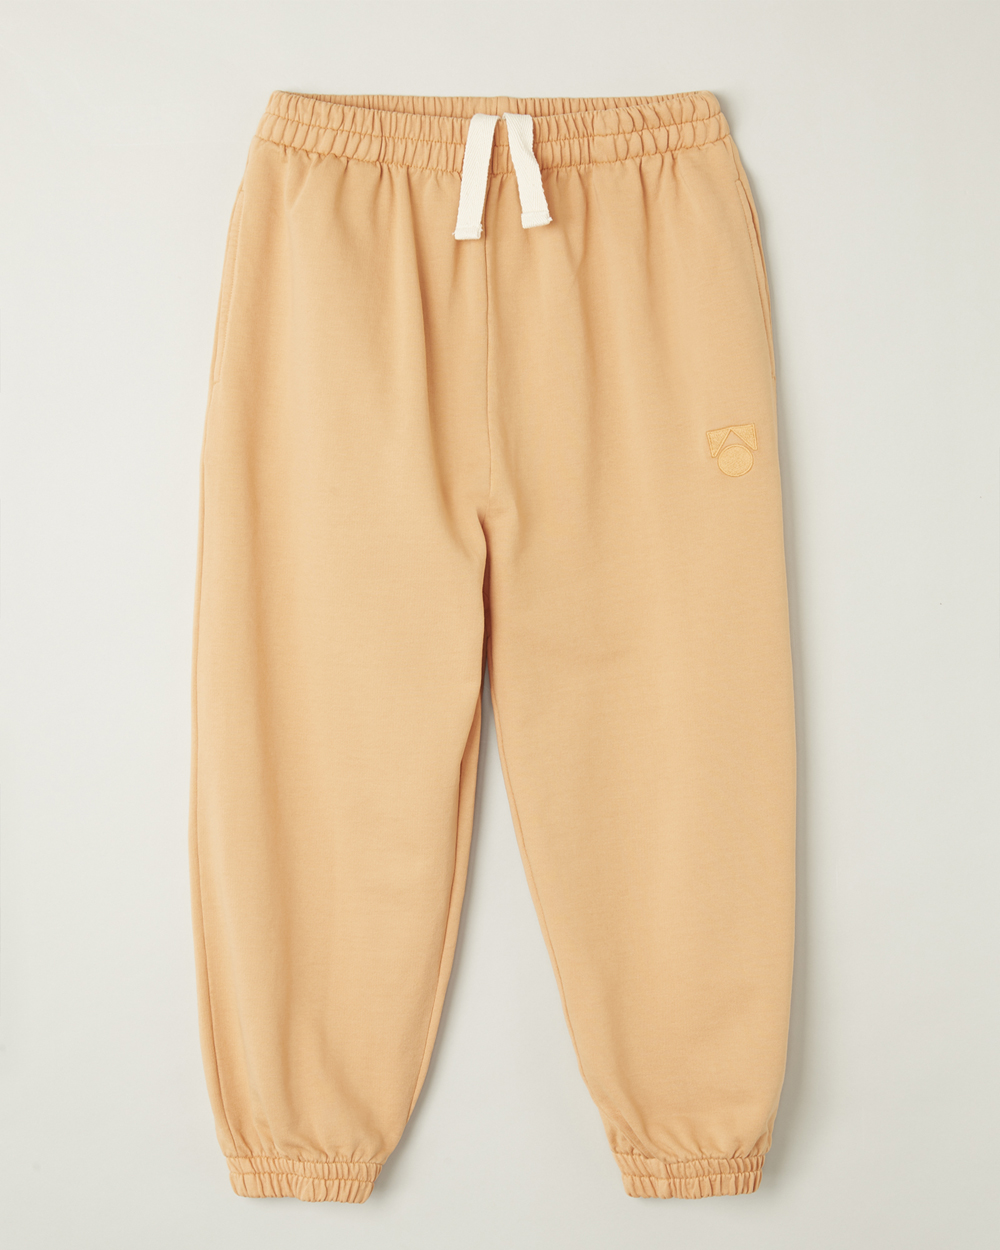 [MAINSTORY]Jogging Pant - Gold Earth [14Y]